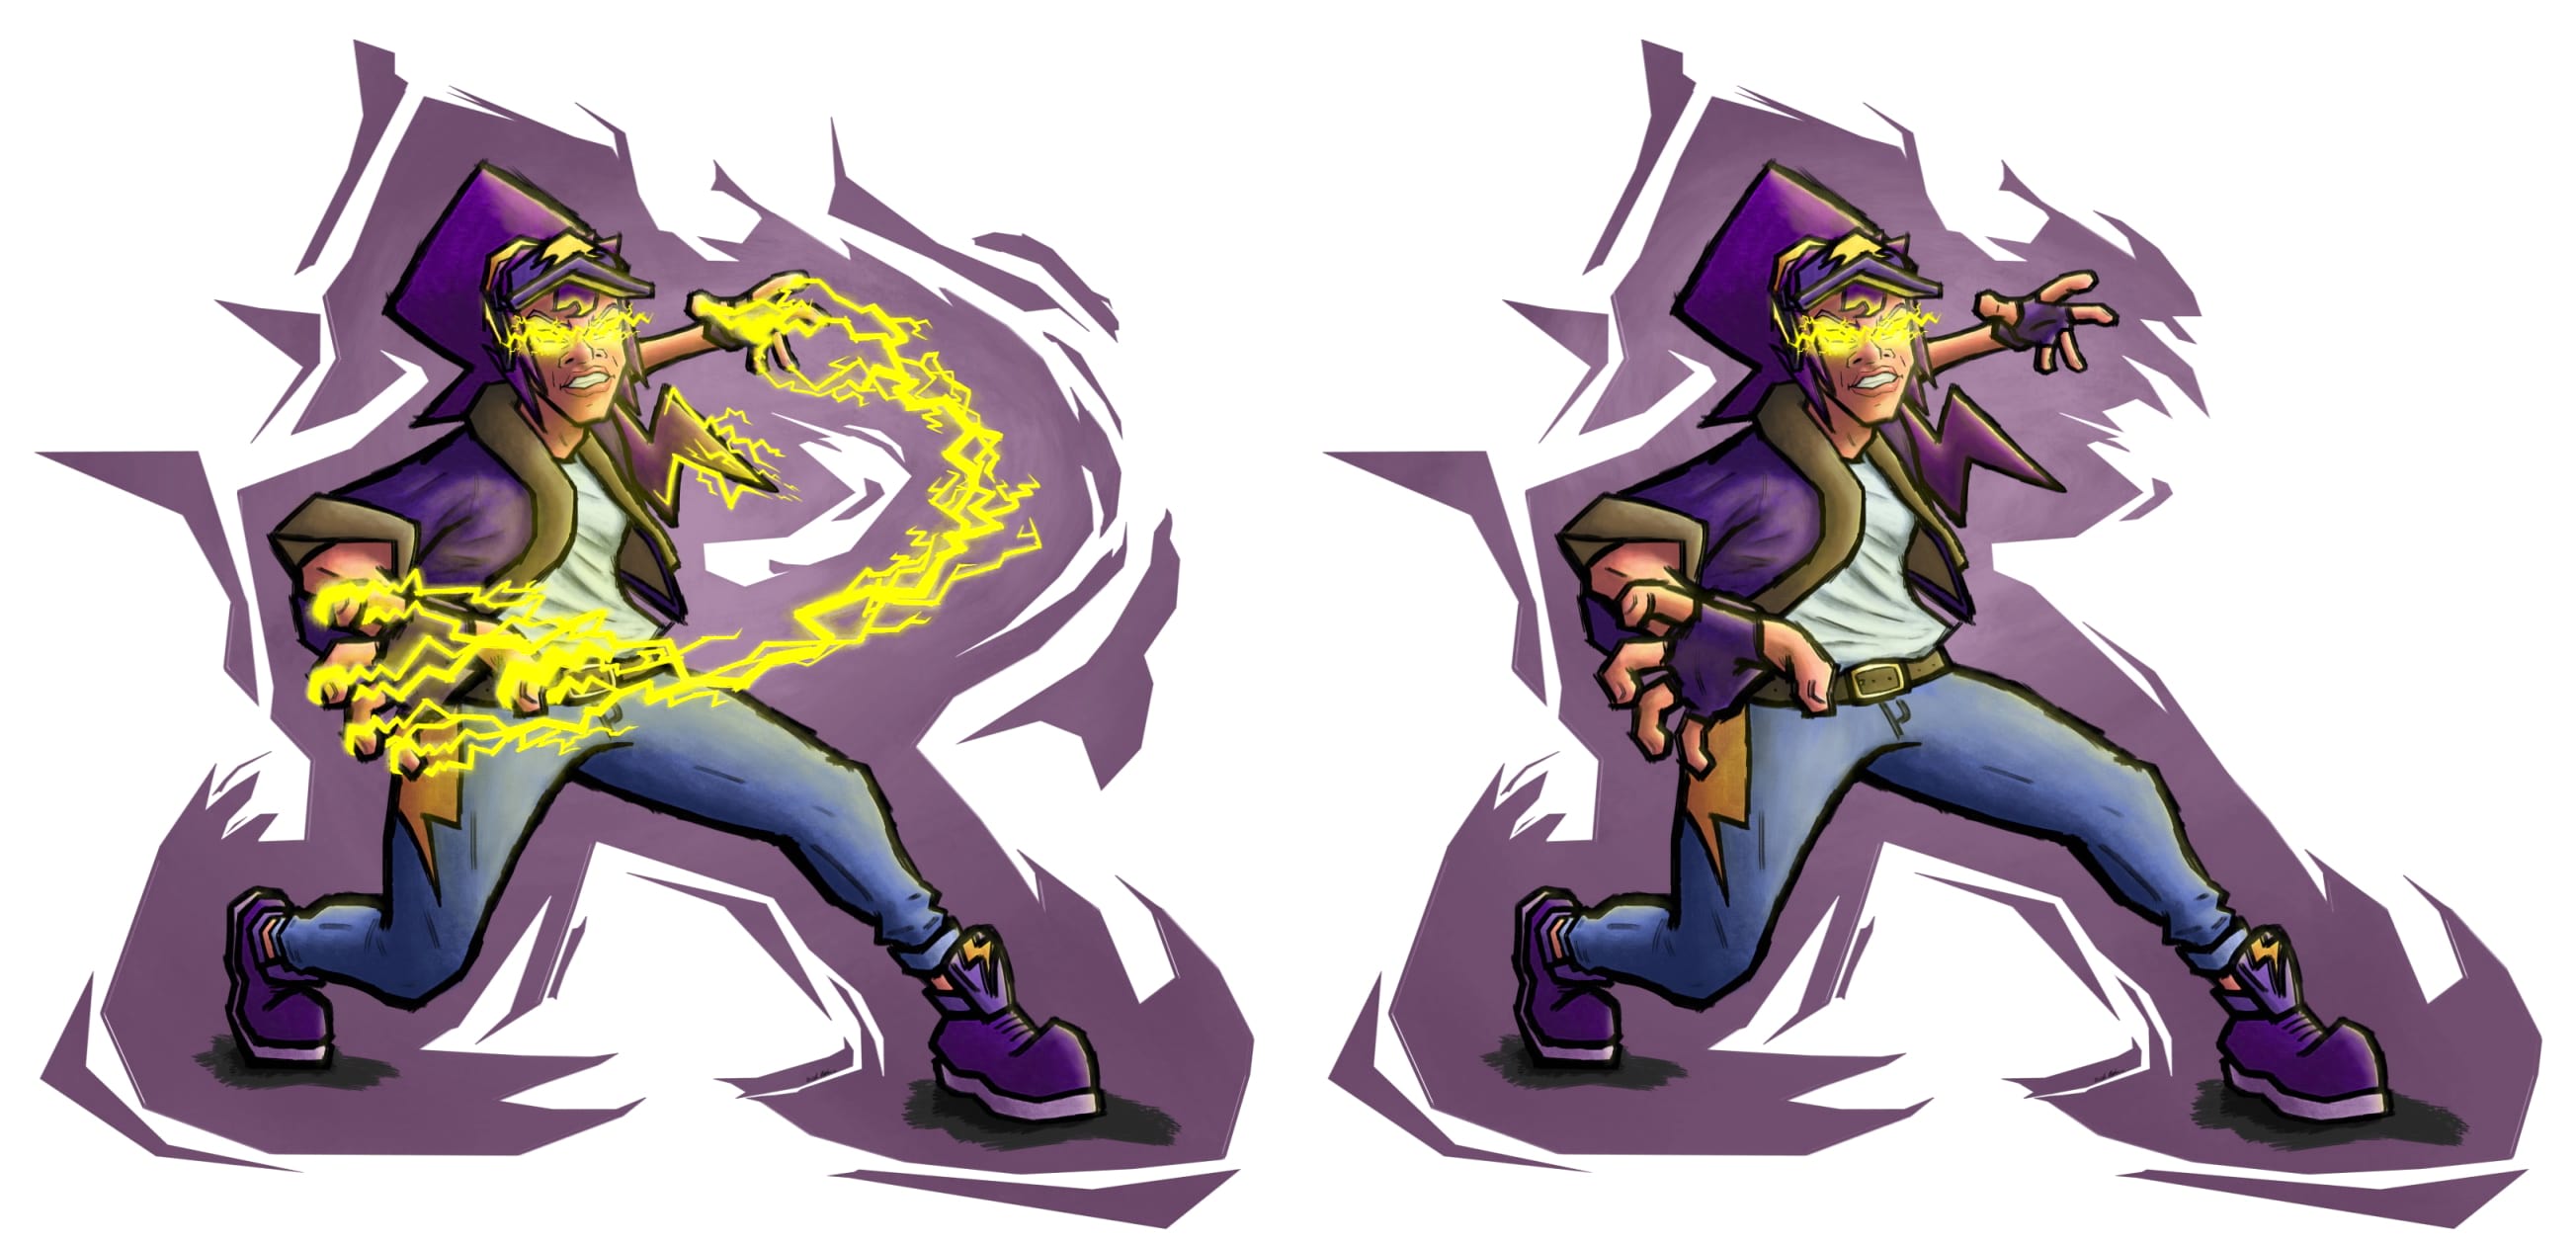 Character with purple pony tail and yellow electricity between her hands